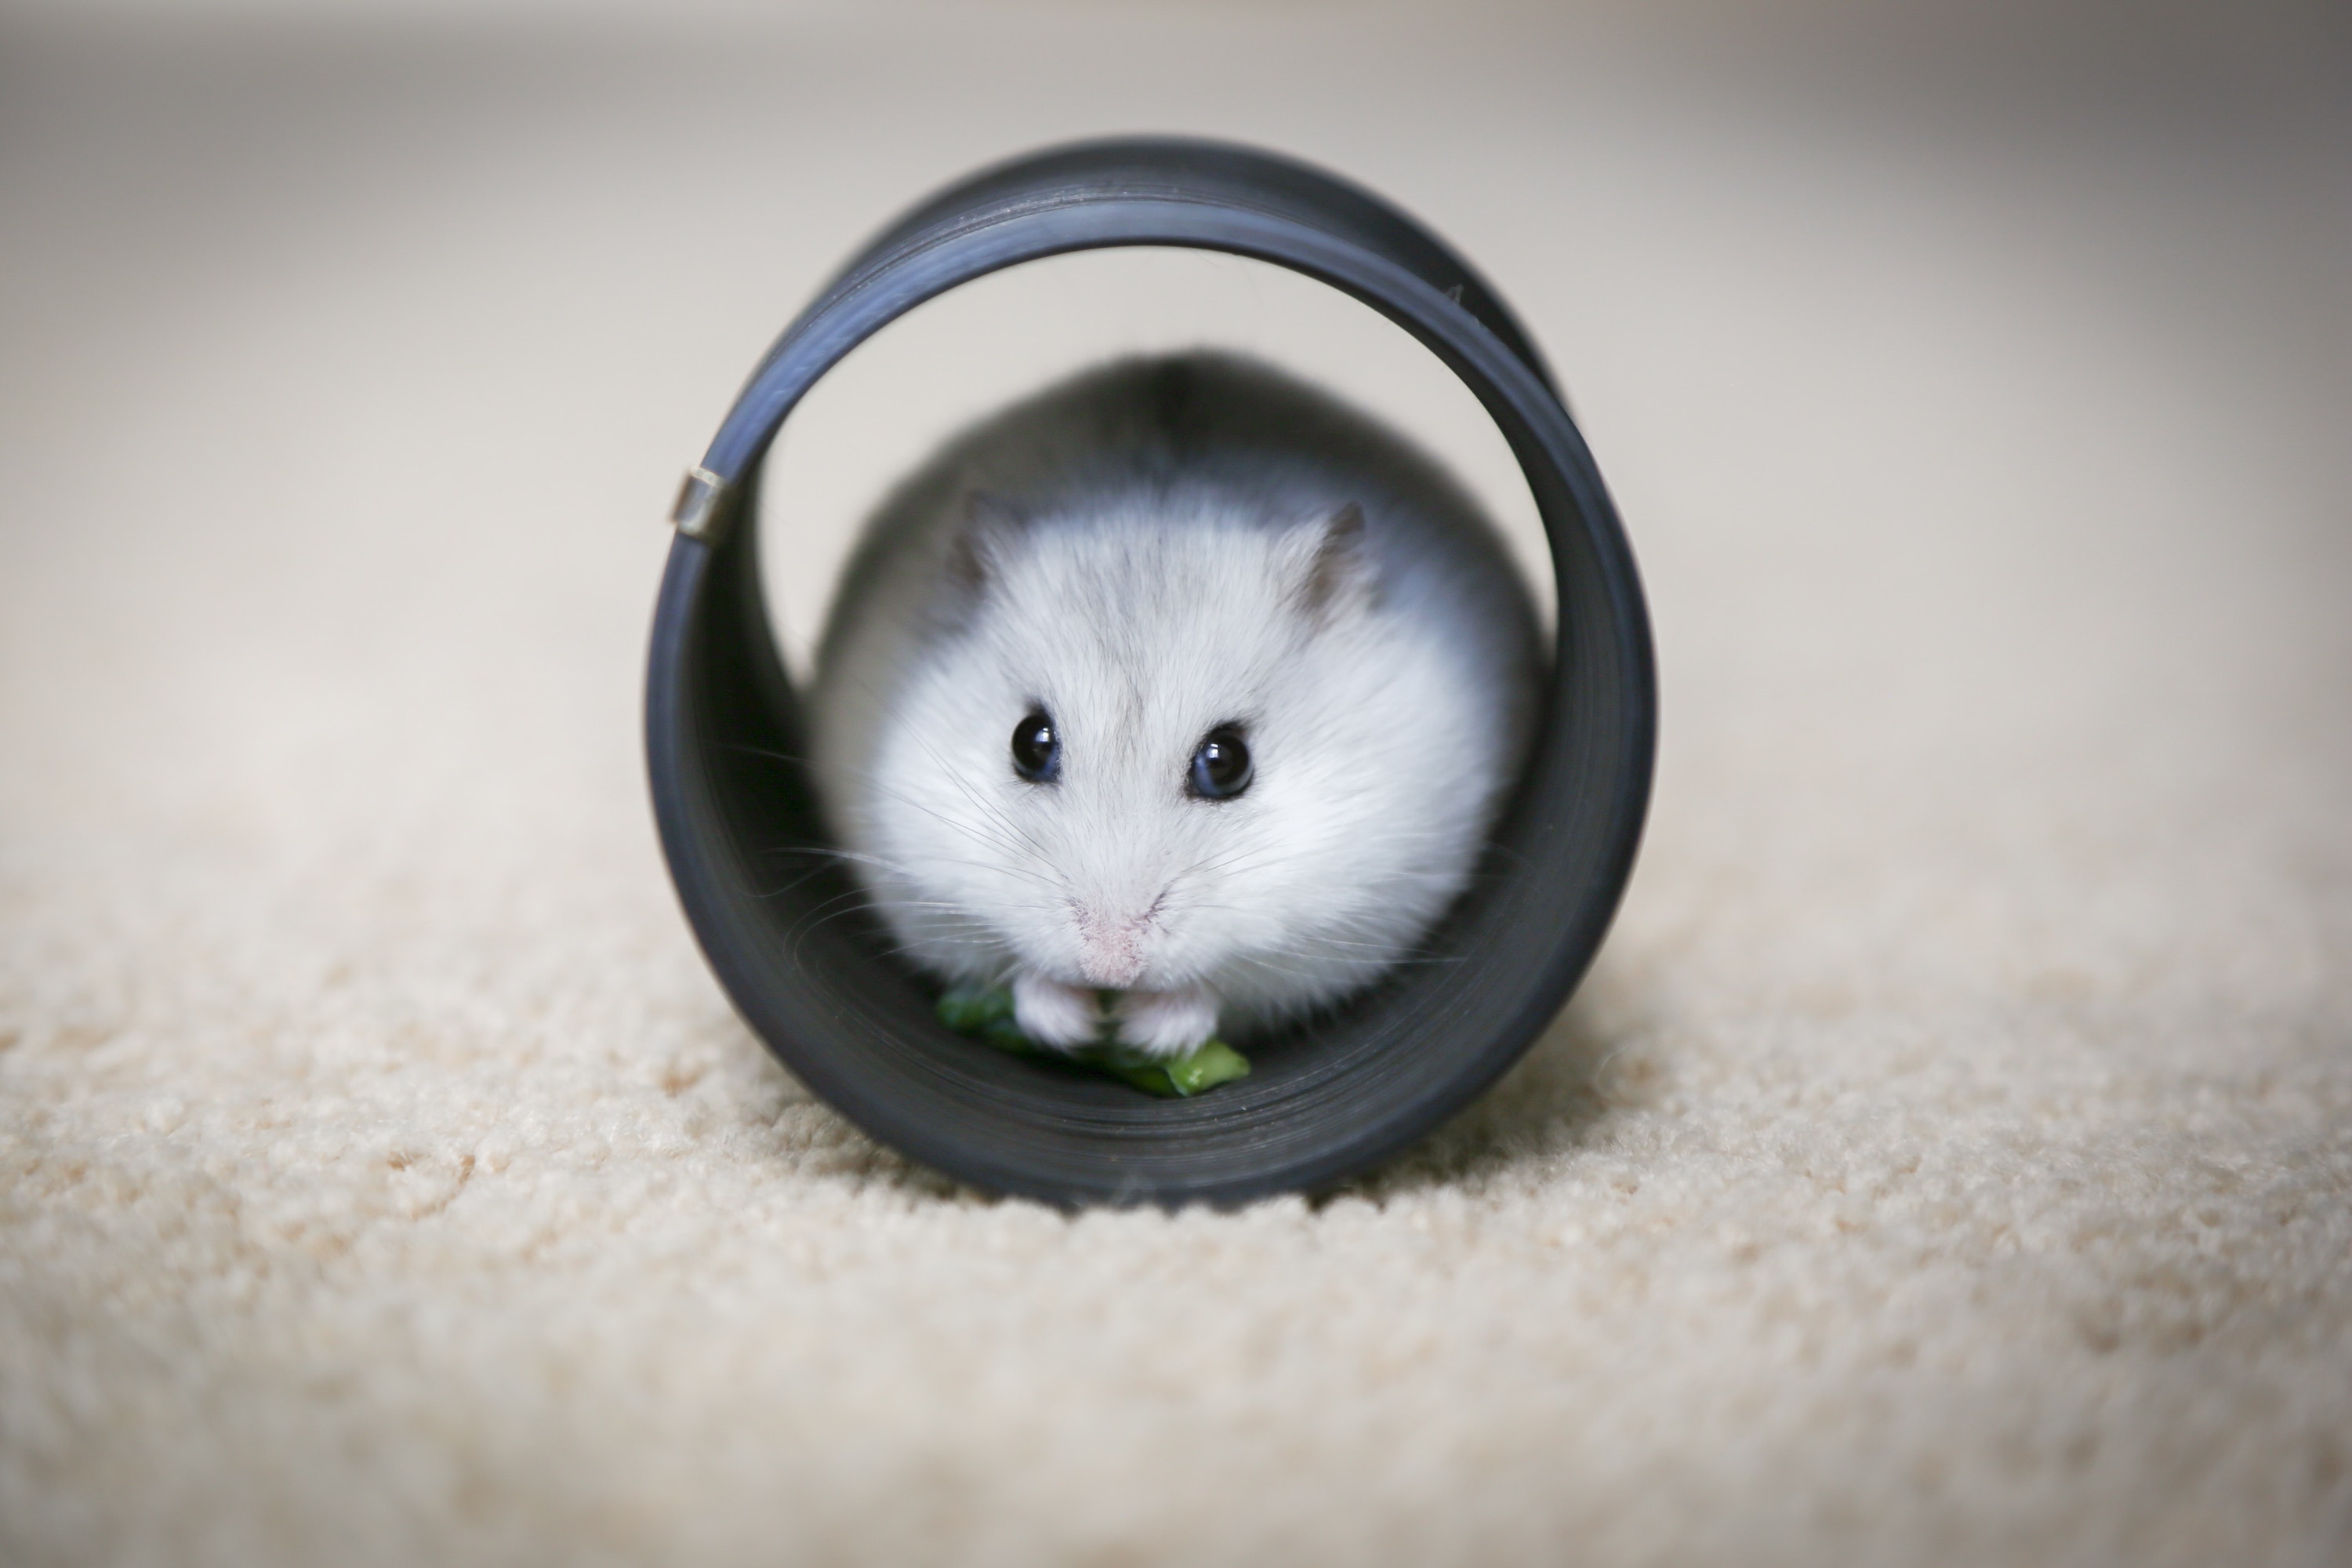 The Hamster's Lifespan - 7 Things Affecting It